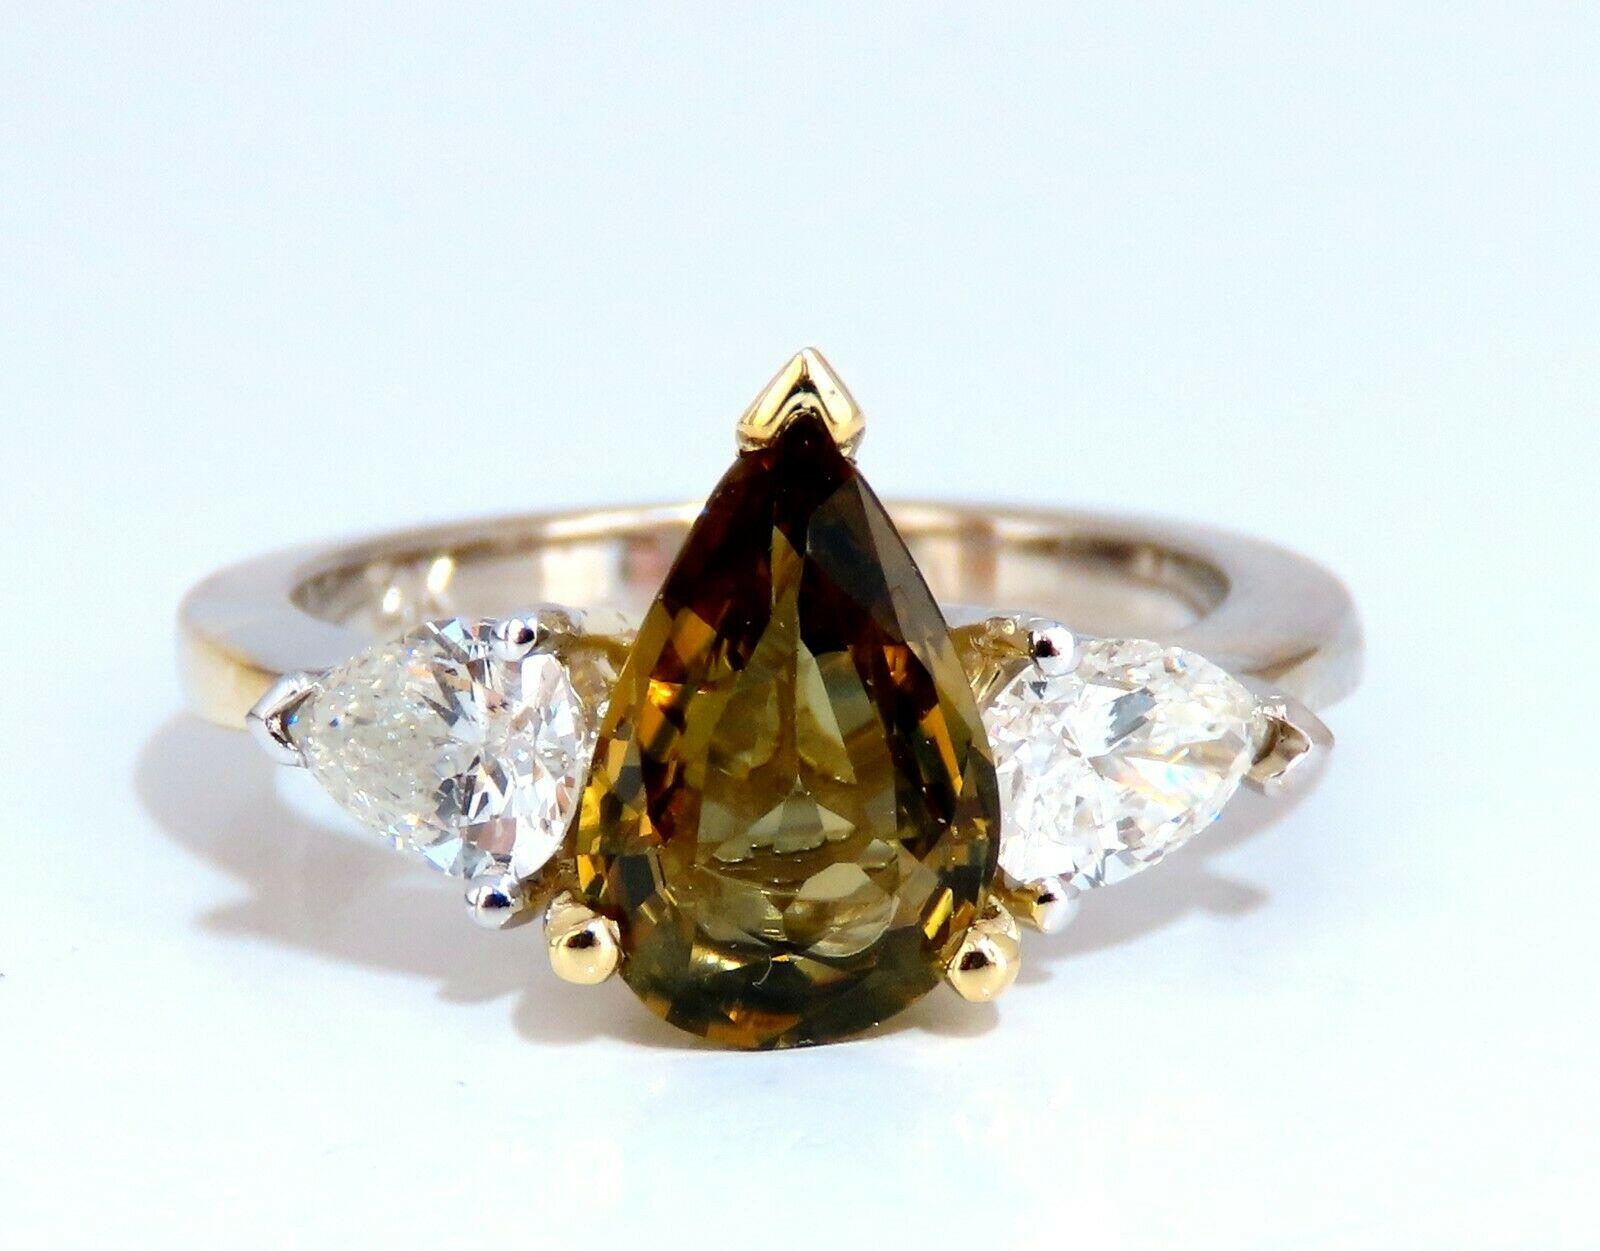 Classic Three Anniversary 

2.04ct. Natural GIA Certified Brown-Yellow Sapphire Ring

GIA Certified Report ID: 6352602820

10.66 X 7.08 X 3.34mm

Full cut Pear brilliant 

Clean Clarity & Transparent

.87ct. (2) Pear Cut Diamonds 

H-color Vs-2